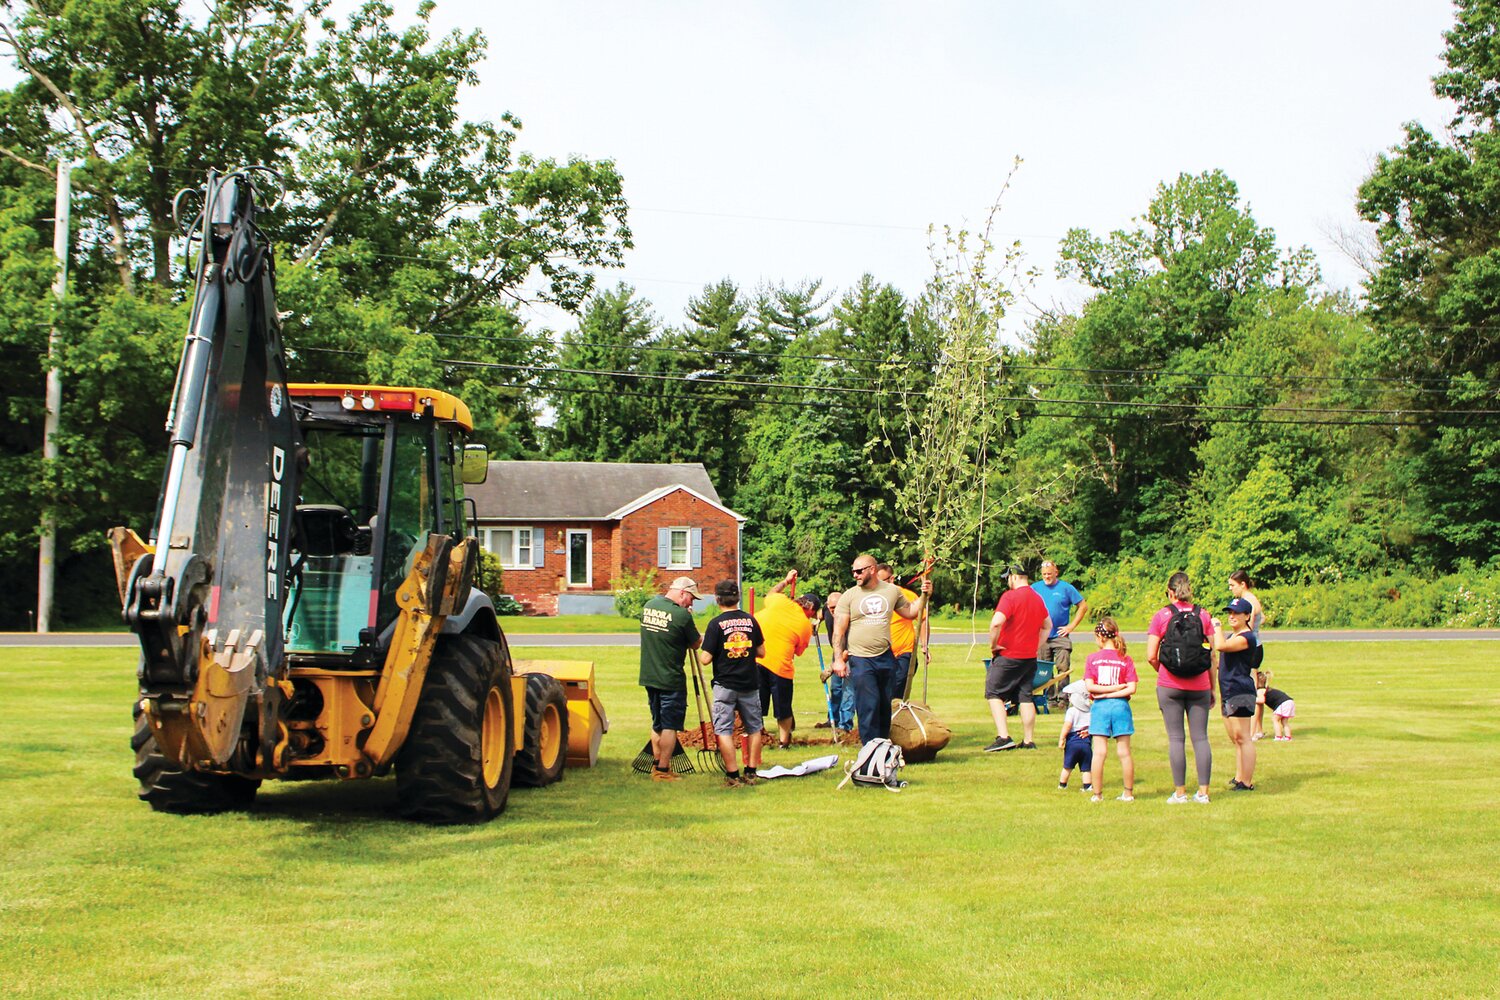 Volunteers plant a tree in Hilltown Civic Park during an event hosted by the Hilltown Township Public Works and the Travis Manion Foundation.